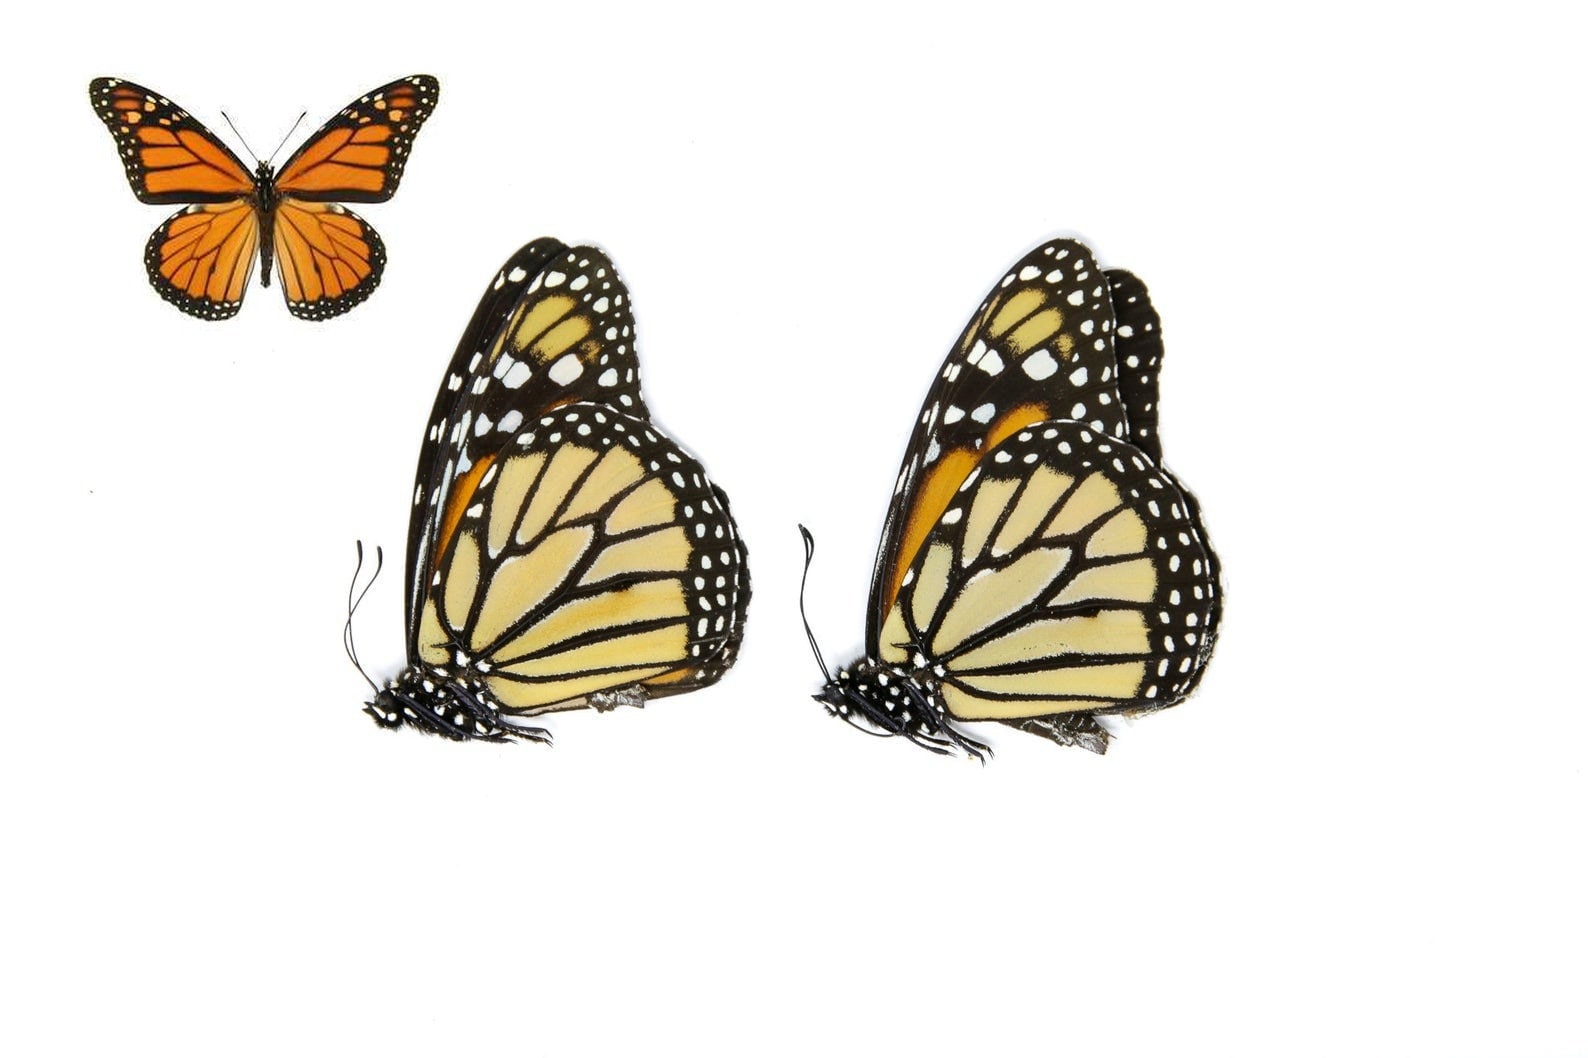 TWO (2) Monarch Butterflies, Danaus plexippus, Dry-Preserved Butterfly Specimens, Ethical Taxidermy Butterflies